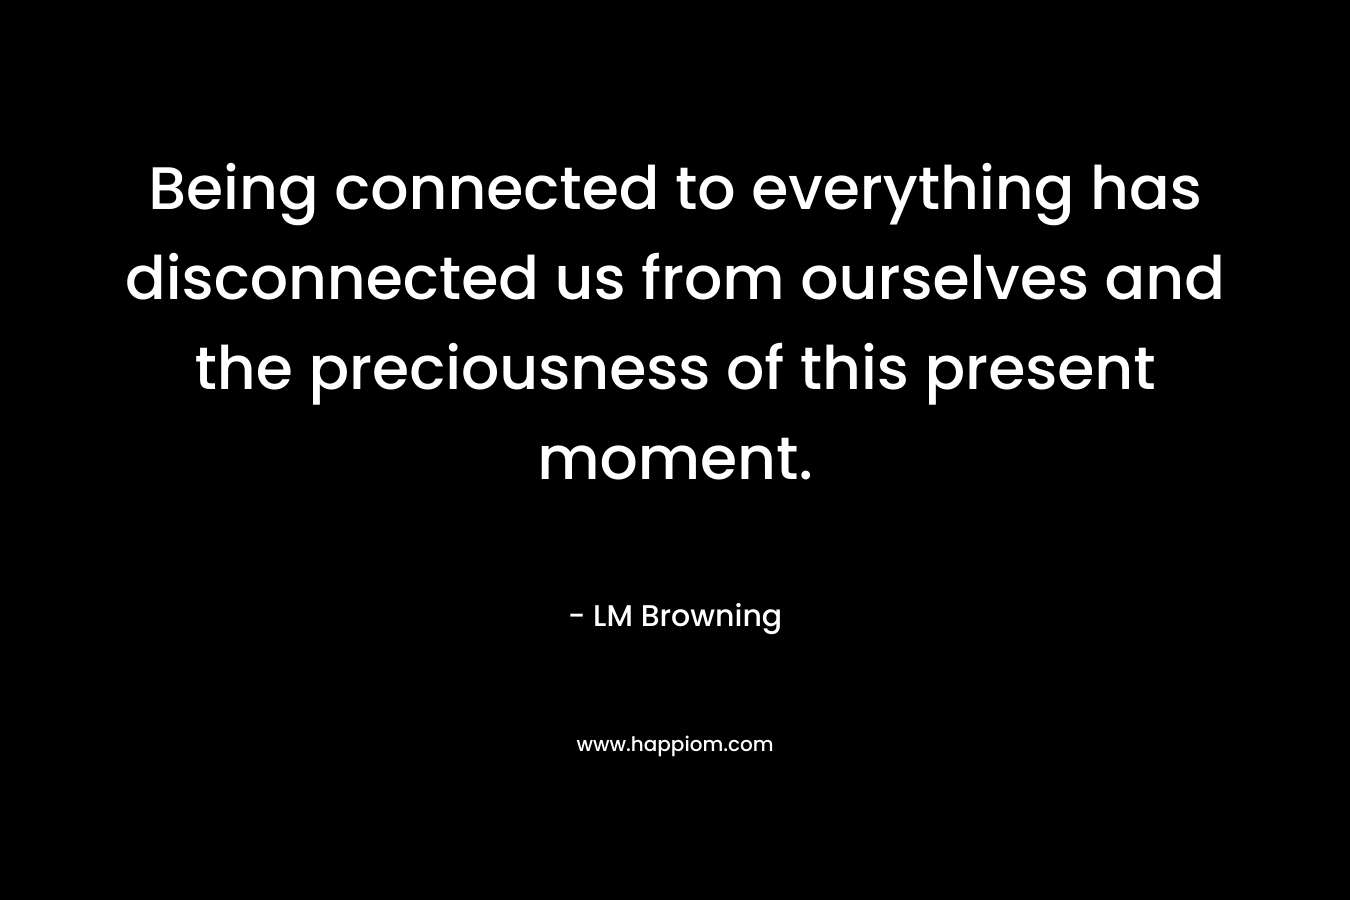 Being connected to everything has disconnected us from ourselves and the preciousness of this present moment.